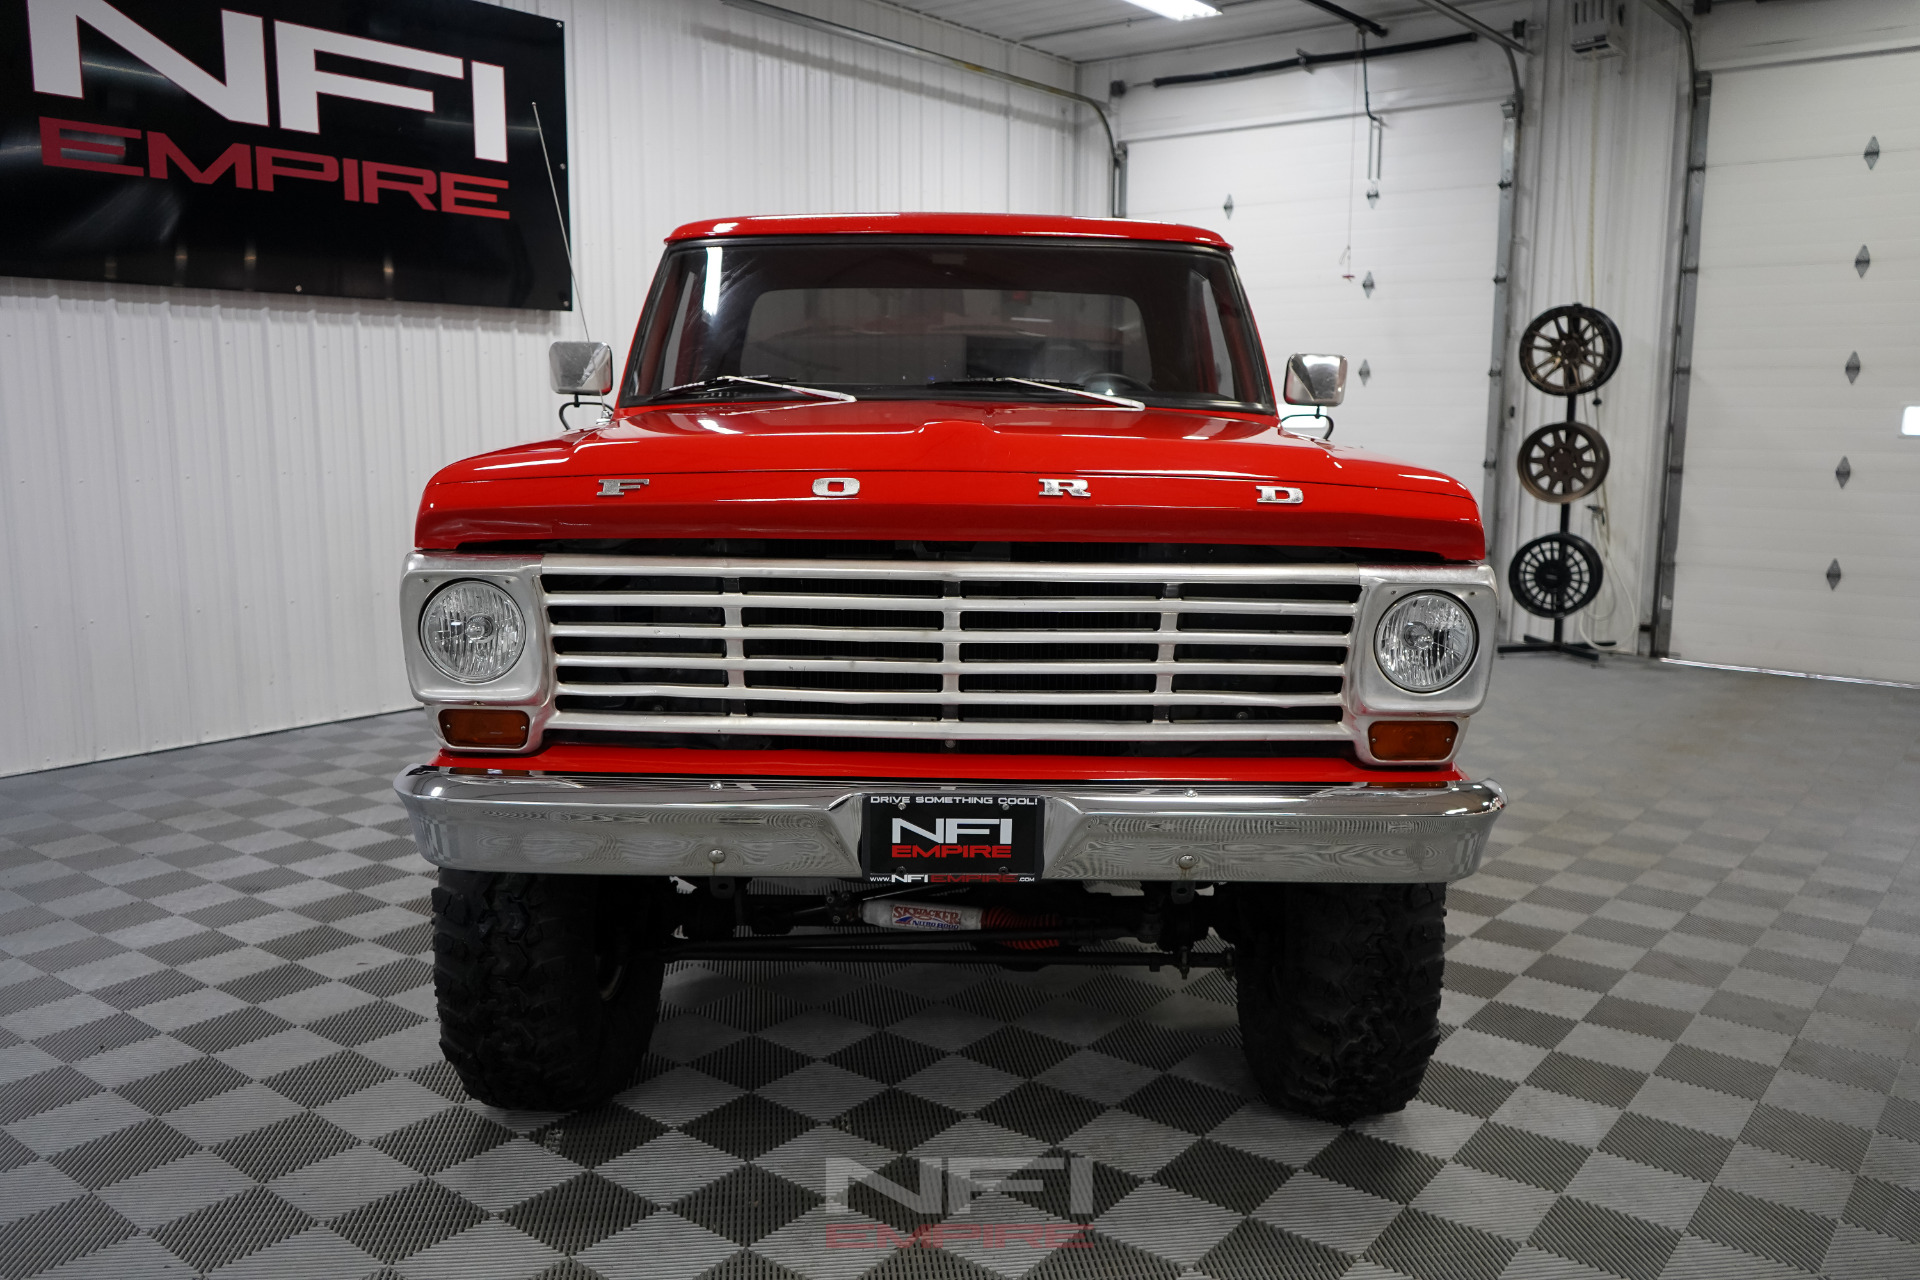 1967 ford f100 lifted